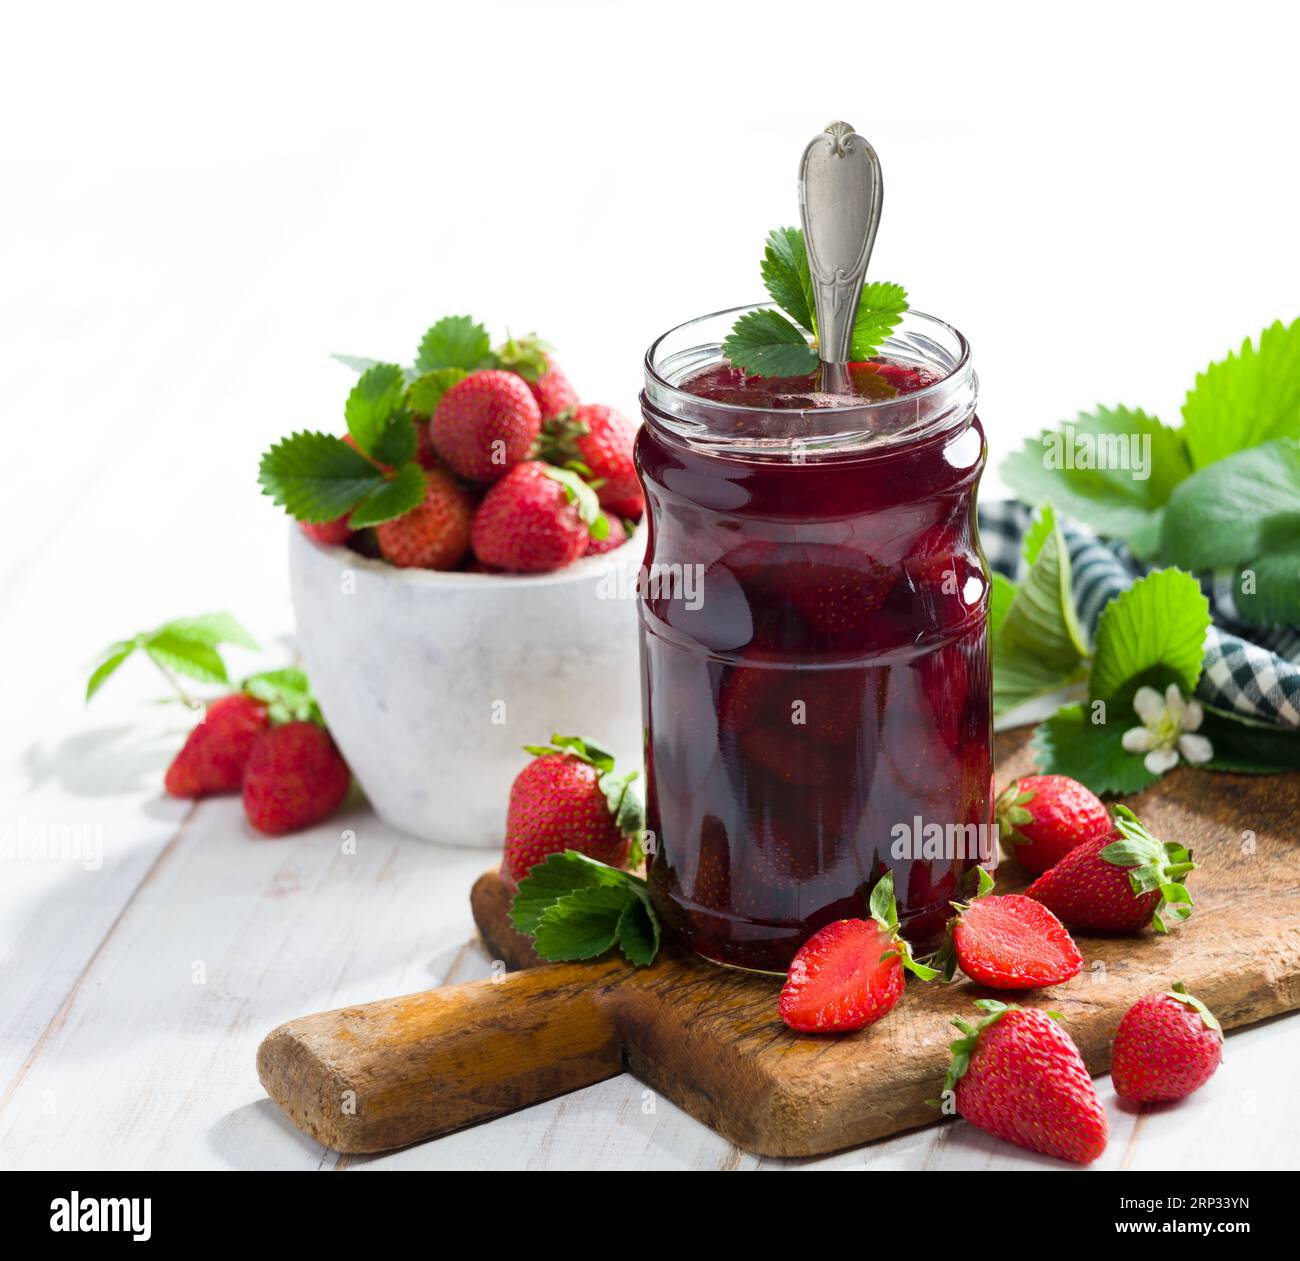 Strawberry jam. Strawberries and a jar of strawberry jam on a white wooden table. Stock Photo